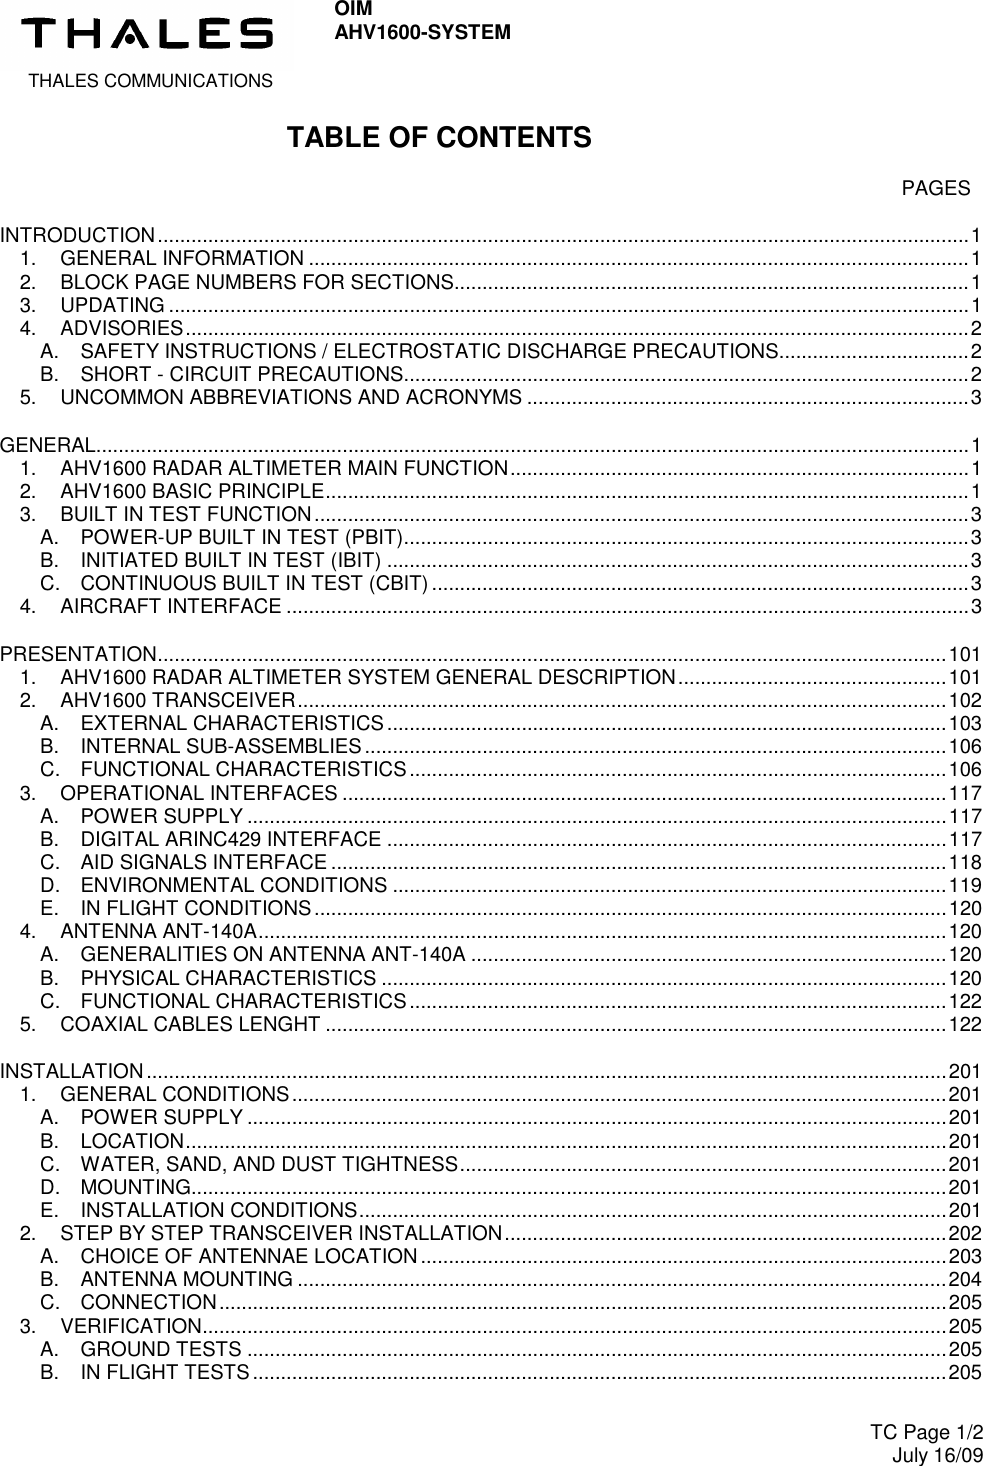  THALES COMMUNICATIONS OIM AHV1600-SYSTEM     TC Page 1/2 July 16/09  TABLE OF CONTENTS    PAGES INTRODUCTION.................................................................................................................................................1 1. GENERAL INFORMATION ......................................................................................................................1 2. BLOCK PAGE NUMBERS FOR SECTIONS............................................................................................1 3. UPDATING ...............................................................................................................................................1 4. ADVISORIES............................................................................................................................................2 A. SAFETY INSTRUCTIONS / ELECTROSTATIC DISCHARGE PRECAUTIONS..................................2 B. SHORT - CIRCUIT PRECAUTIONS.....................................................................................................2 5. UNCOMMON ABBREVIATIONS AND ACRONYMS ...............................................................................3 GENERAL............................................................................................................................................................1 1. AHV1600 RADAR ALTIMETER MAIN FUNCTION..................................................................................1 2. AHV1600 BASIC PRINCIPLE...................................................................................................................1 3. BUILT IN TEST FUNCTION.....................................................................................................................3 A. POWER-UP BUILT IN TEST (PBIT).....................................................................................................3 B. INITIATED BUILT IN TEST (IBIT) ........................................................................................................3 C. CONTINUOUS BUILT IN TEST (CBIT) ................................................................................................3 4. AIRCRAFT INTERFACE ..........................................................................................................................3 PRESENTATION.............................................................................................................................................101 1. AHV1600 RADAR ALTIMETER SYSTEM GENERAL DESCRIPTION................................................101 2. AHV1600 TRANSCEIVER....................................................................................................................102 A. EXTERNAL CHARACTERISTICS....................................................................................................103 B. INTERNAL SUB-ASSEMBLIES........................................................................................................106 C. FUNCTIONAL CHARACTERISTICS................................................................................................106 3. OPERATIONAL INTERFACES ............................................................................................................117 A. POWER SUPPLY .............................................................................................................................117 B. DIGITAL ARINC429 INTERFACE ....................................................................................................117 C. AID SIGNALS INTERFACE ..............................................................................................................118 D. ENVIRONMENTAL CONDITIONS ...................................................................................................119 E. IN FLIGHT CONDITIONS.................................................................................................................120 4. ANTENNA ANT-140A...........................................................................................................................120 A. GENERALITIES ON ANTENNA ANT-140A .....................................................................................120 B. PHYSICAL CHARACTERISTICS .....................................................................................................120 C. FUNCTIONAL CHARACTERISTICS................................................................................................122 5. COAXIAL CABLES LENGHT ...............................................................................................................122 INSTALLATION ...............................................................................................................................................201 1. GENERAL CONDITIONS.....................................................................................................................201 A. POWER SUPPLY .............................................................................................................................201 B. LOCATION........................................................................................................................................201 C. WATER, SAND, AND DUST TIGHTNESS.......................................................................................201 D. MOUNTING.......................................................................................................................................201 E. INSTALLATION CONDITIONS.........................................................................................................201 2. STEP BY STEP TRANSCEIVER INSTALLATION...............................................................................202 A. CHOICE OF ANTENNAE LOCATION..............................................................................................203 B. ANTENNA MOUNTING ....................................................................................................................204 C. CONNECTION..................................................................................................................................205 3. VERIFICATION.....................................................................................................................................205 A. GROUND TESTS .............................................................................................................................205 B. IN FLIGHT TESTS ............................................................................................................................205 